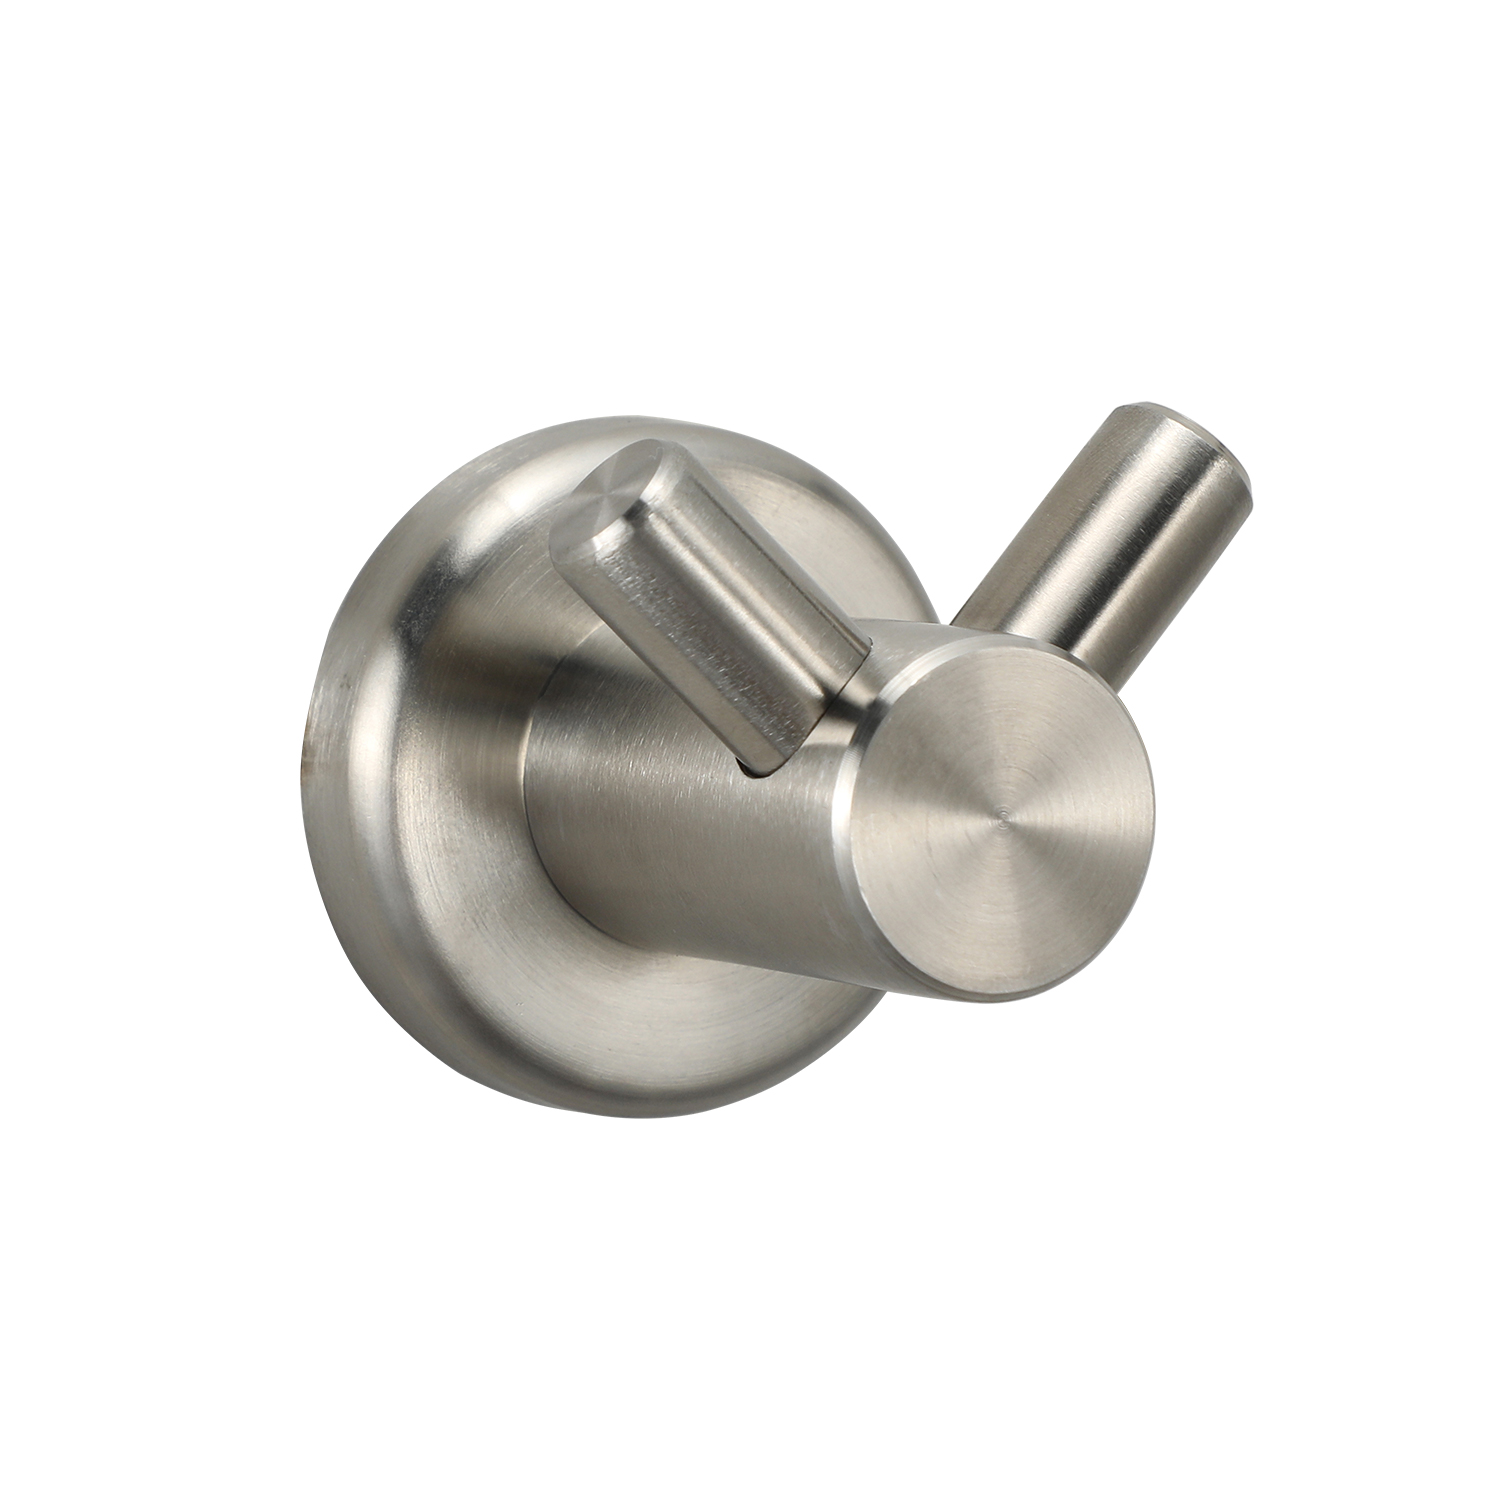 Stainless Steel Wall mounted Robe Hook